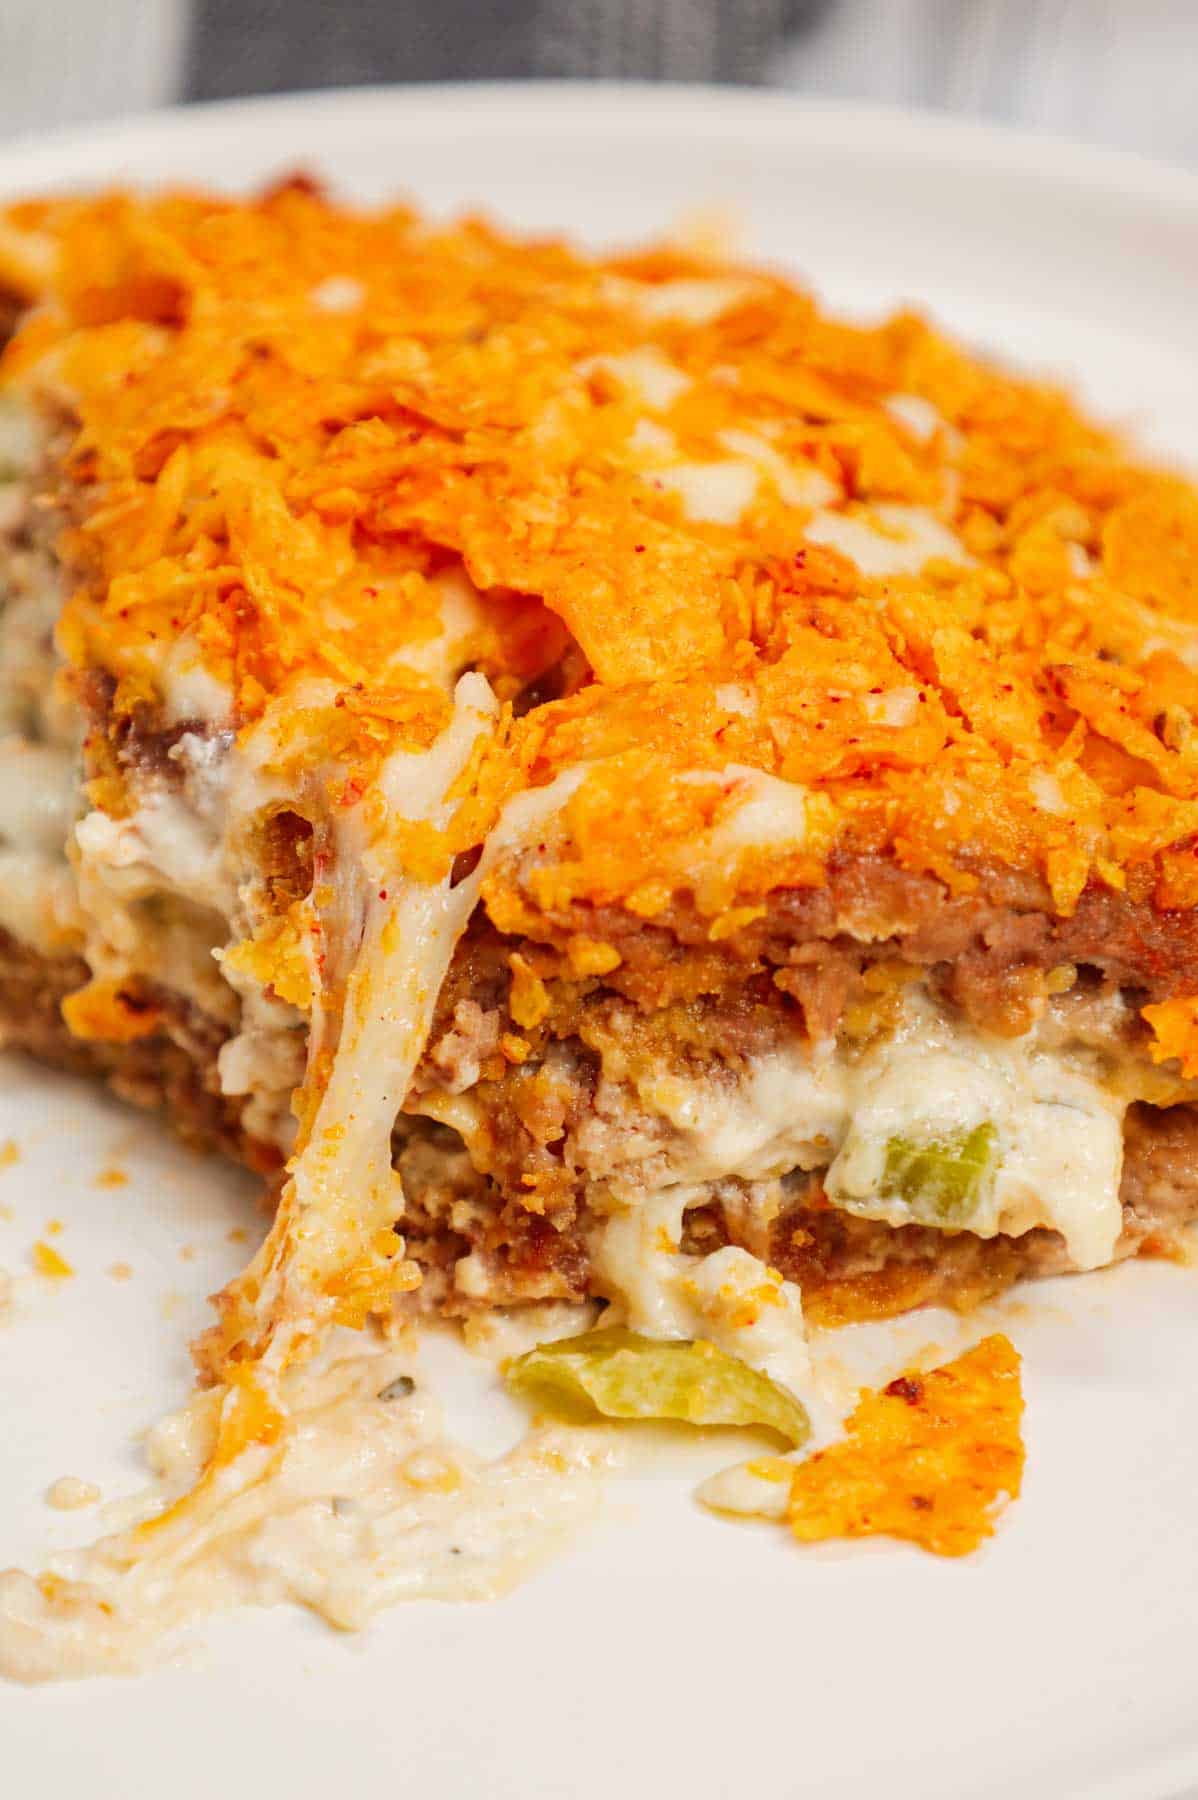 Dorito Meatloaf Casserole is a hearty dish with layers of ground beef and sausage meatloaf loaded with crushed Doritos, a cream cheese and ranch dressing filling and topped with cheese and more crushed Doritos.